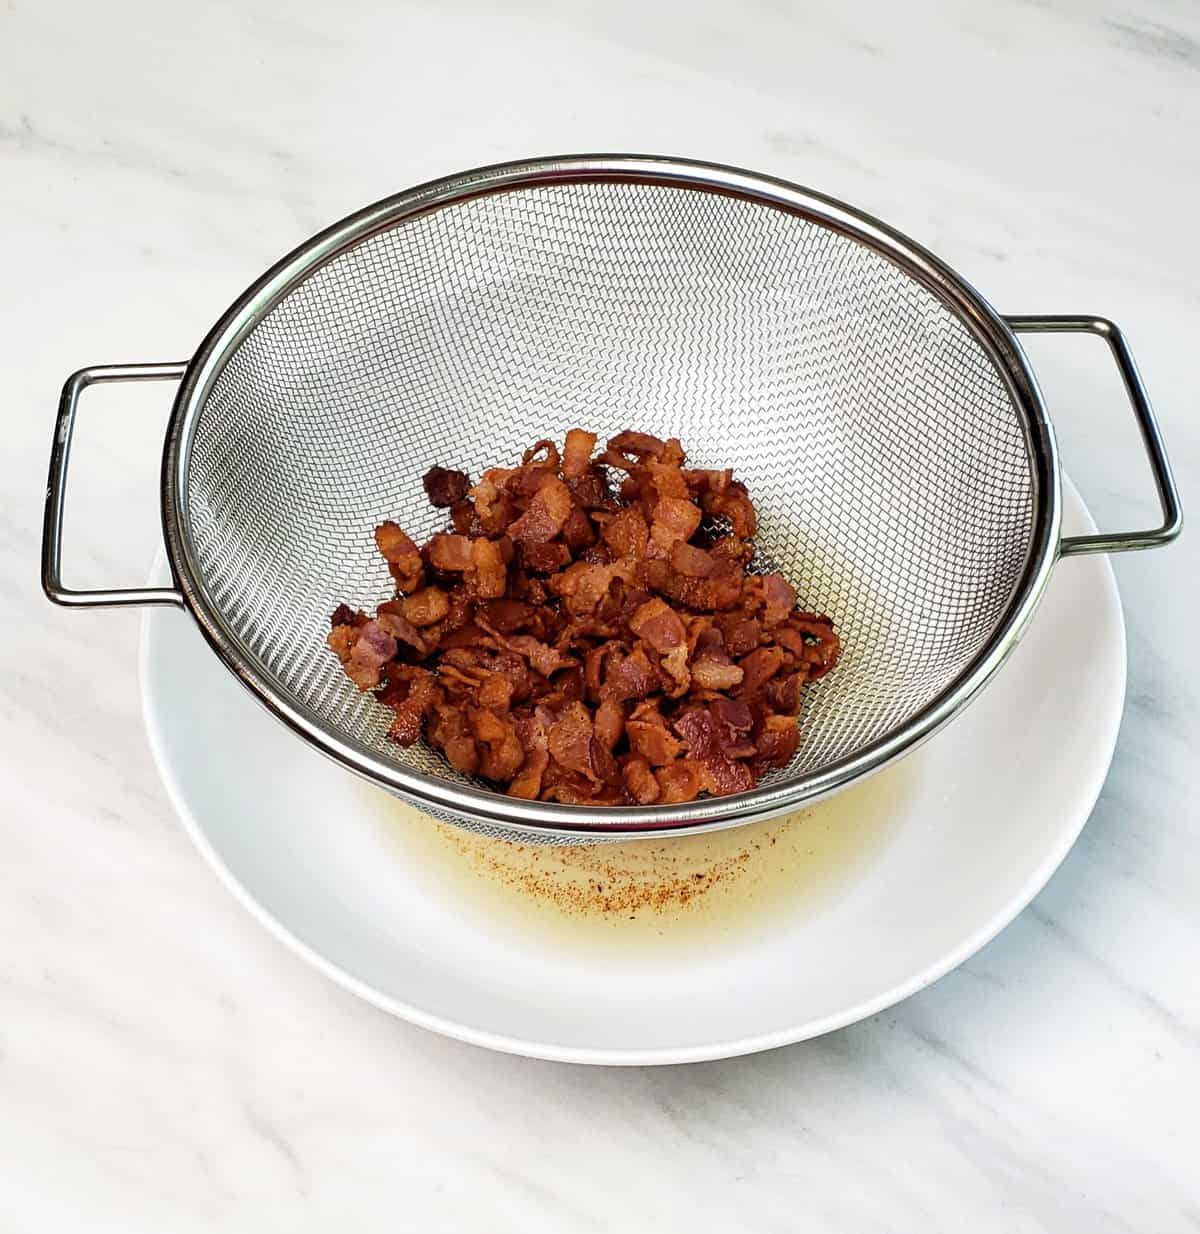 Drained chopped cooked bacon in a metal sieve